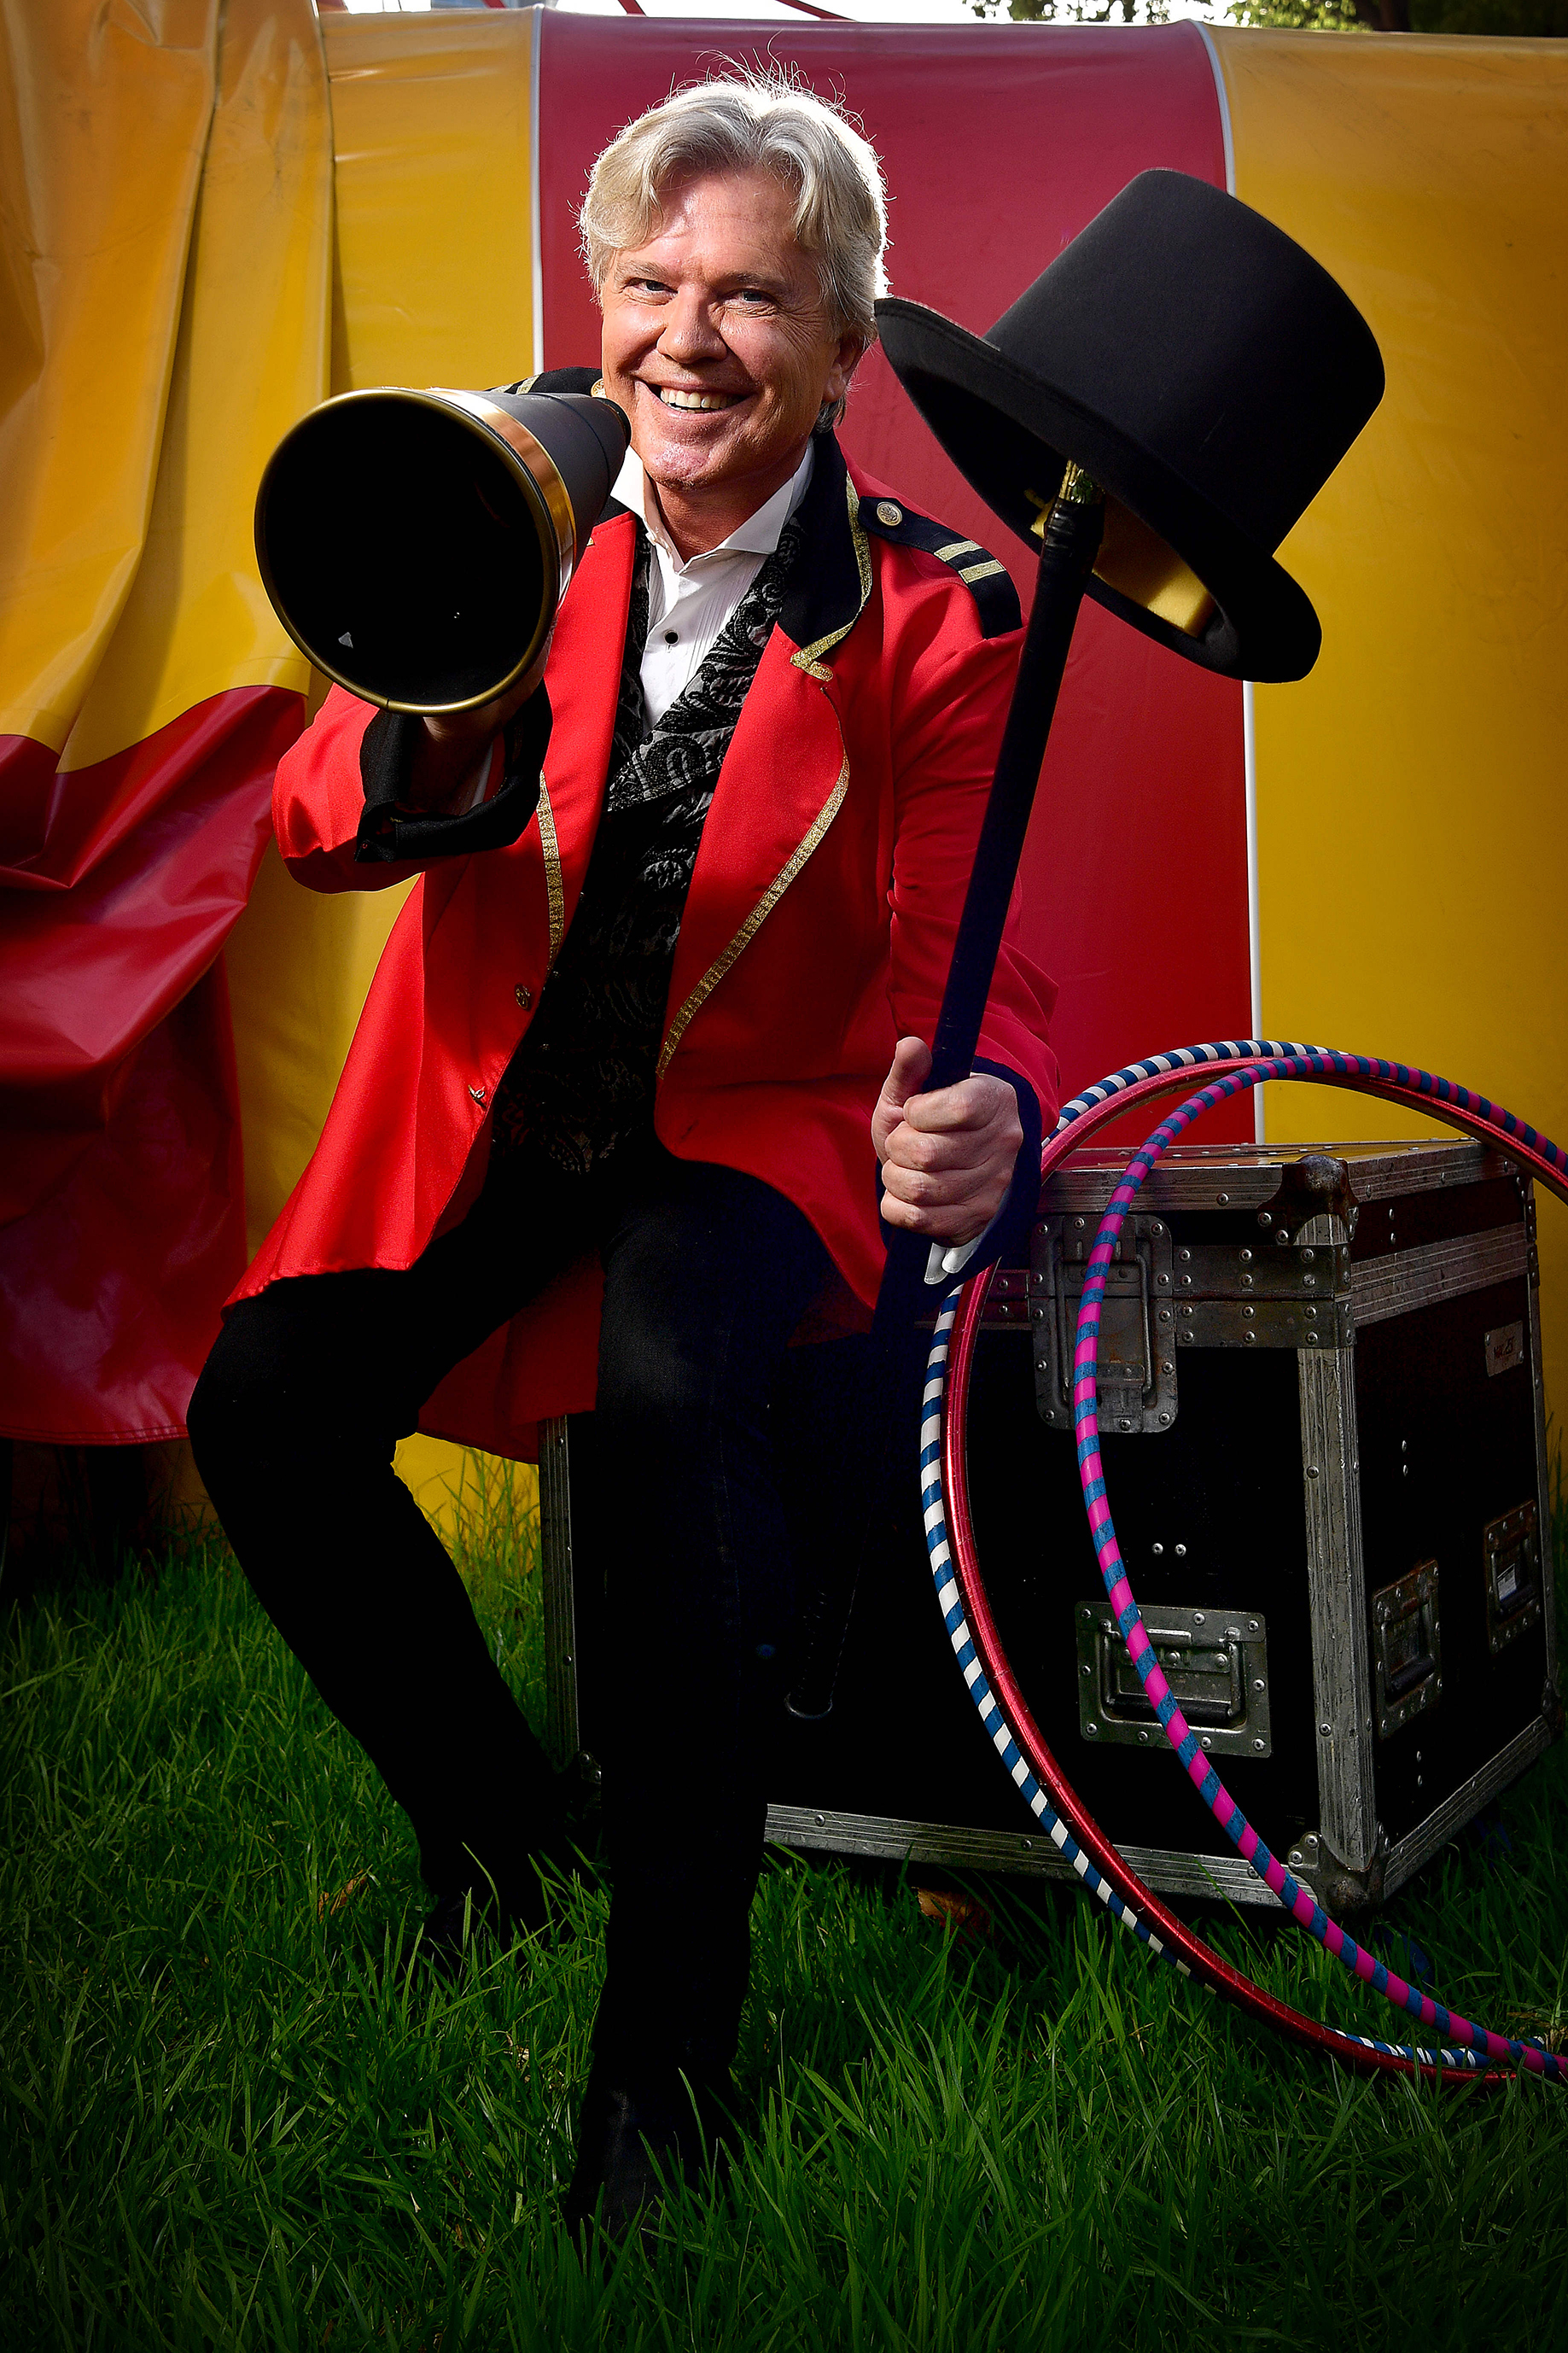  22.3.18 - Mark Holden will be holding the world premier of his show 'The Greatest Show on Earth' at this year's Adelaide Cabaret Festival. The show will be among other things, how his ancestors were circus performers.  (The Advertiser, News Corp Aus